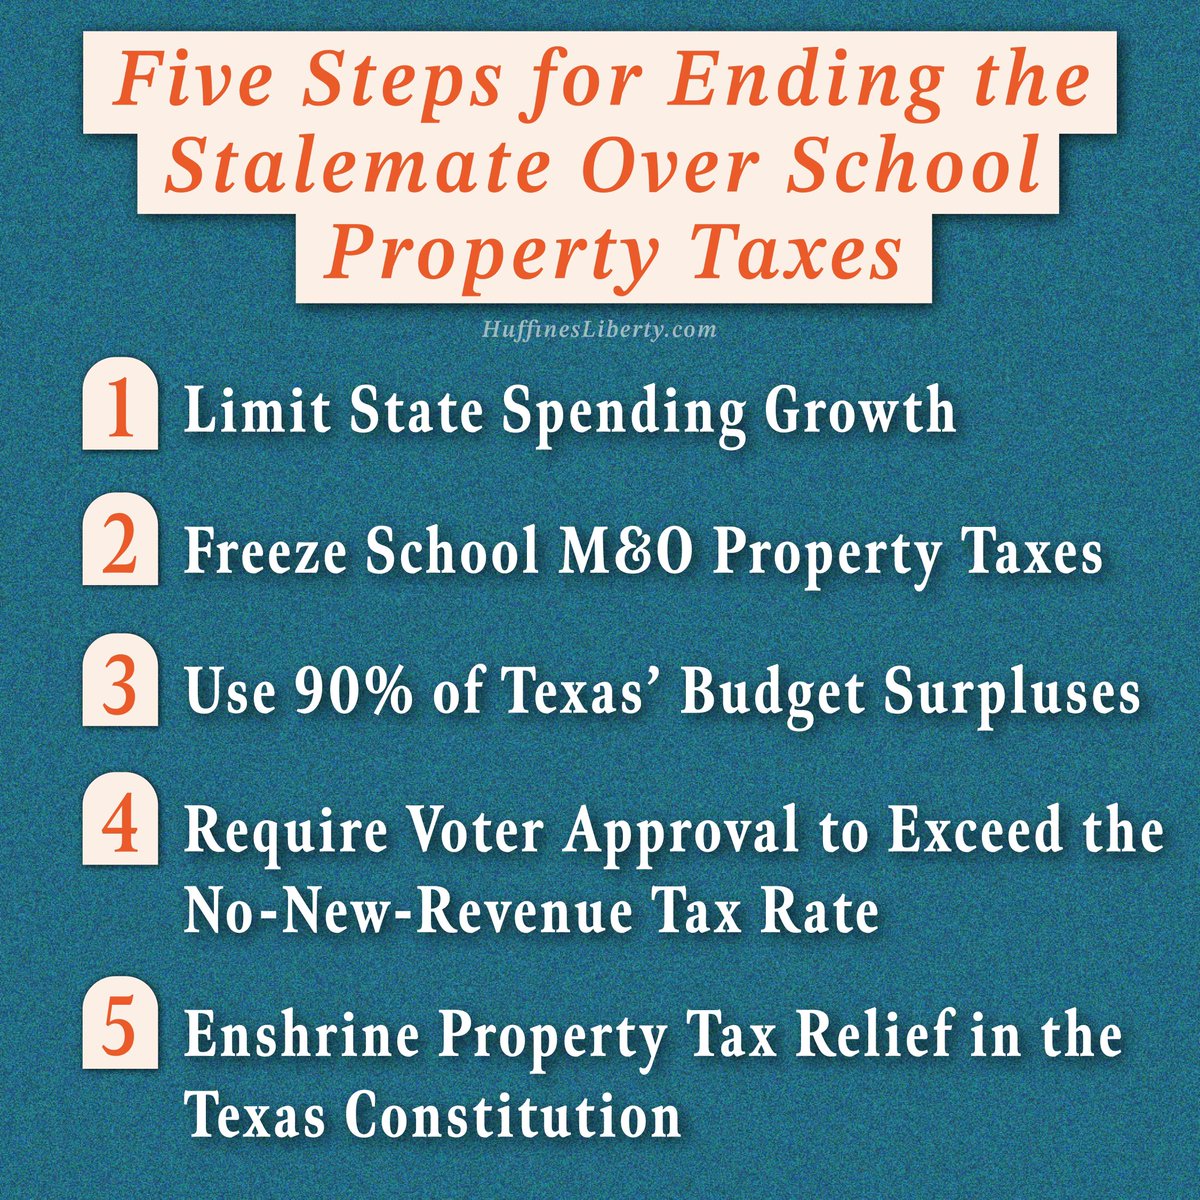 Giving permanent property tax relief to homeowners, renters, and businesses is simple: